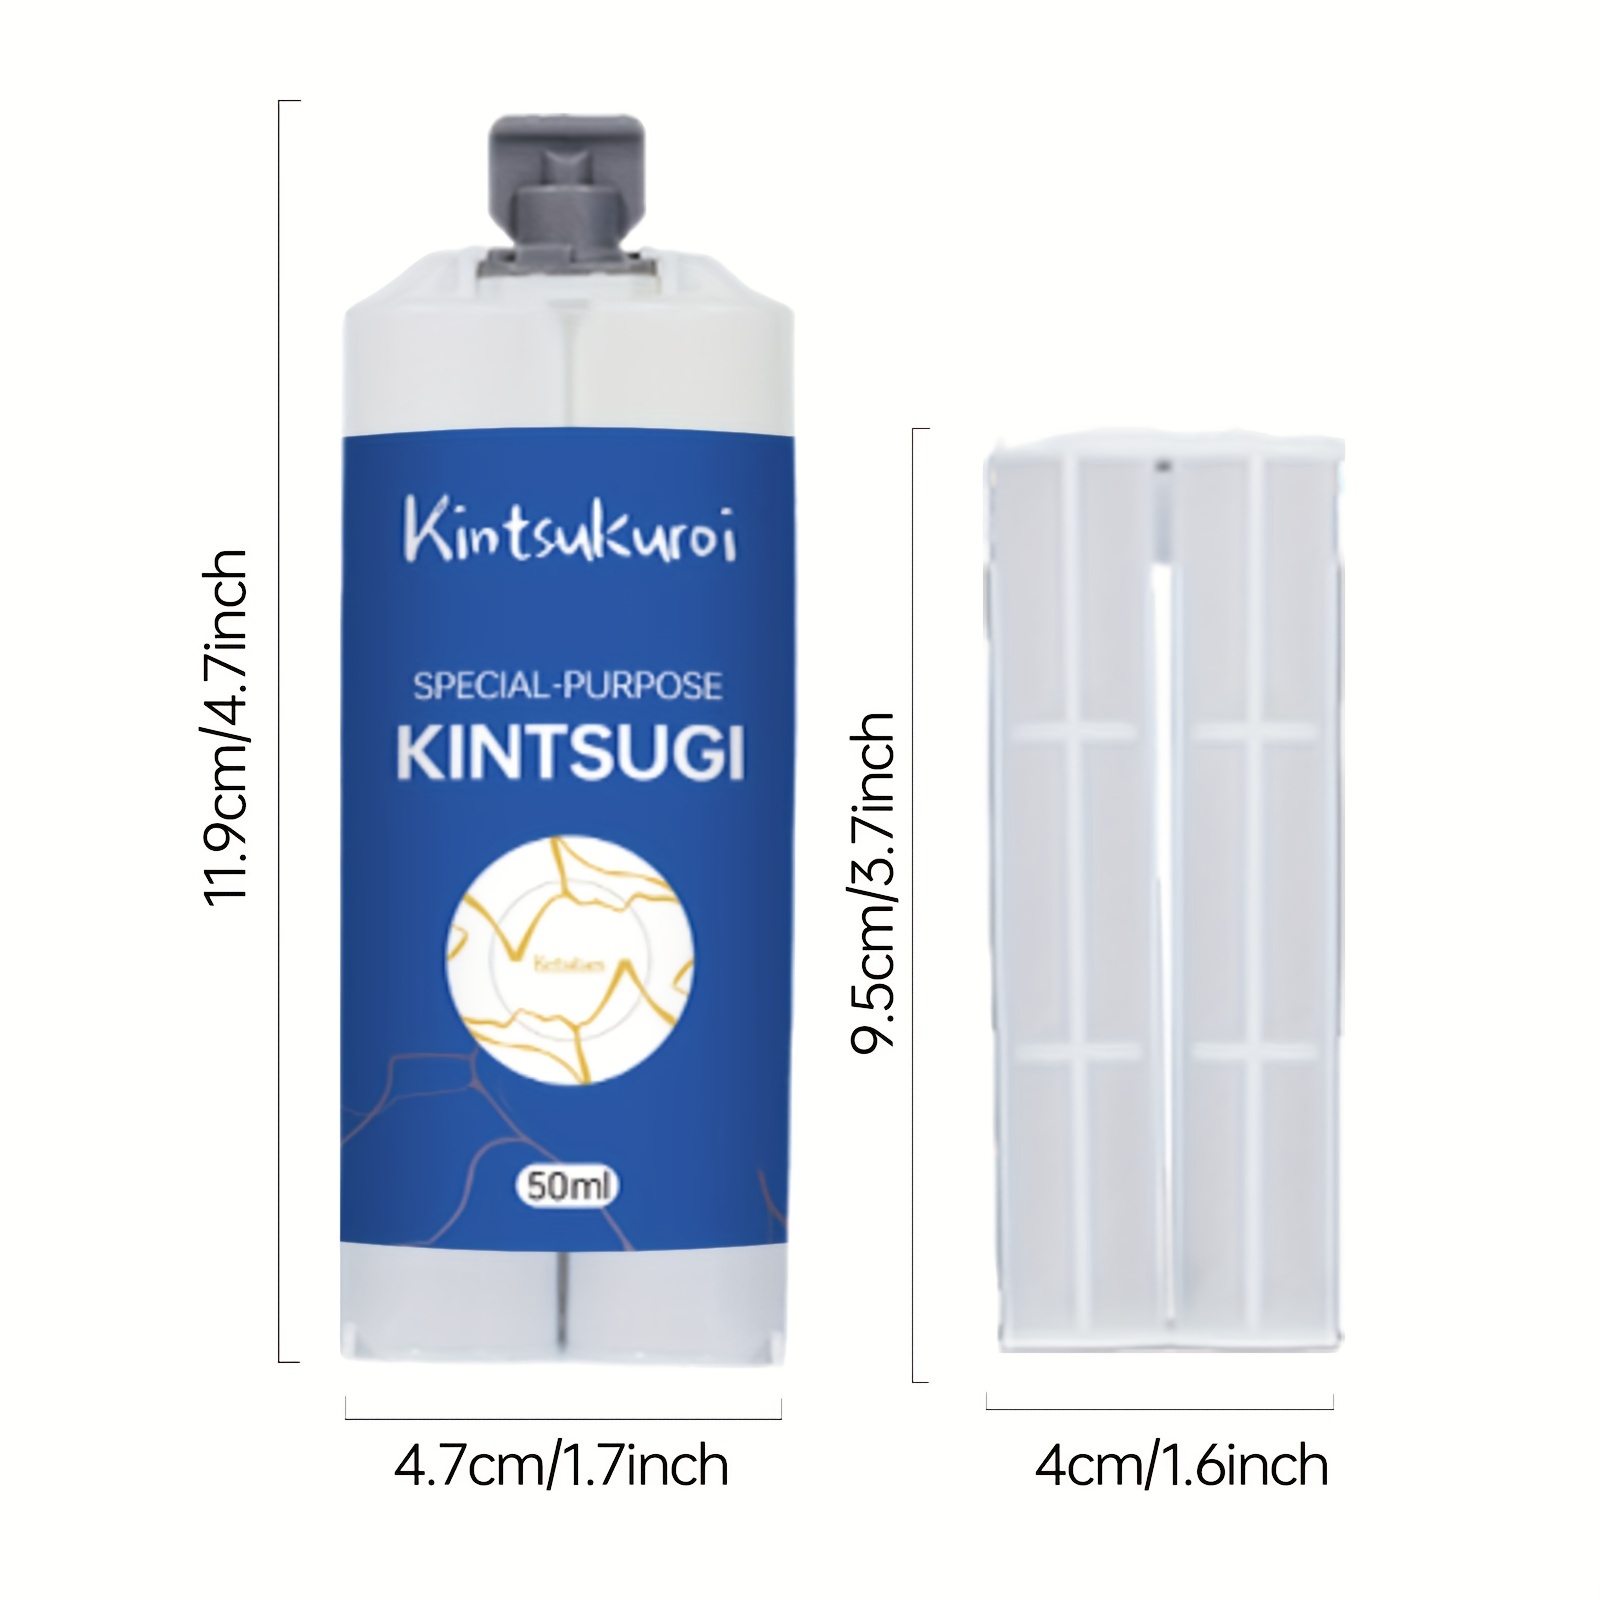 Kintsugi Repair Kit Gold, Japanese Kintsugi Kit to Improve Your Ceramic,  Repair Your Meaningful Pottery with Gold Powder Glue, Perfect for Beginners